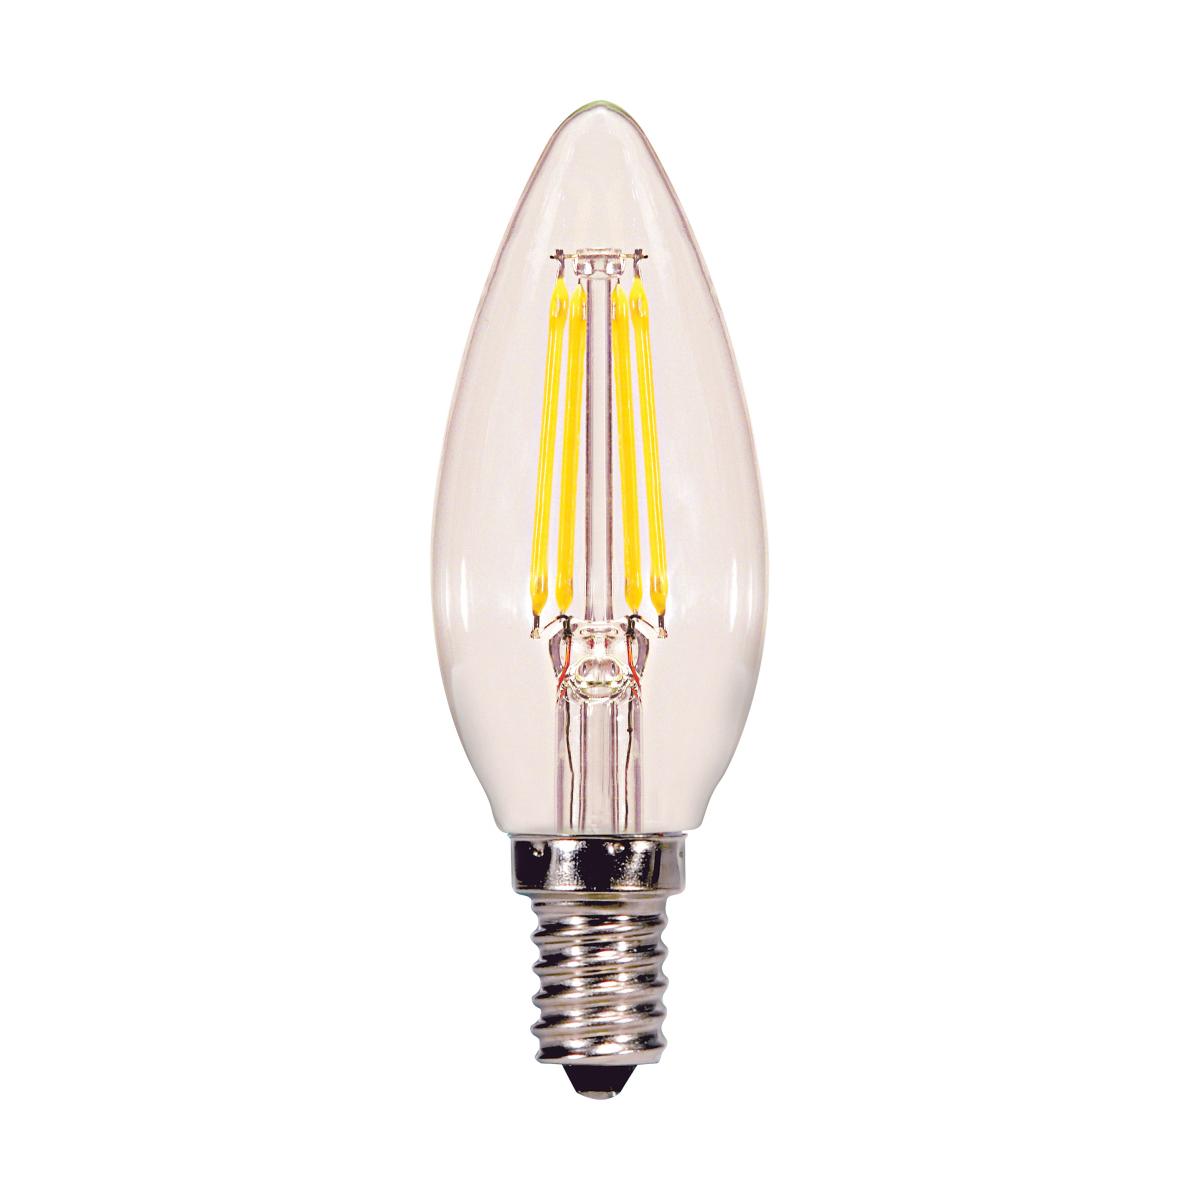 Replacement for Satco S21729 4.5W CTC/LED/3K/CL/120V/3PK 4.5 Watt B11 LED Clear E12 Candelabra base 3000K 3-Pack - NOW S21367